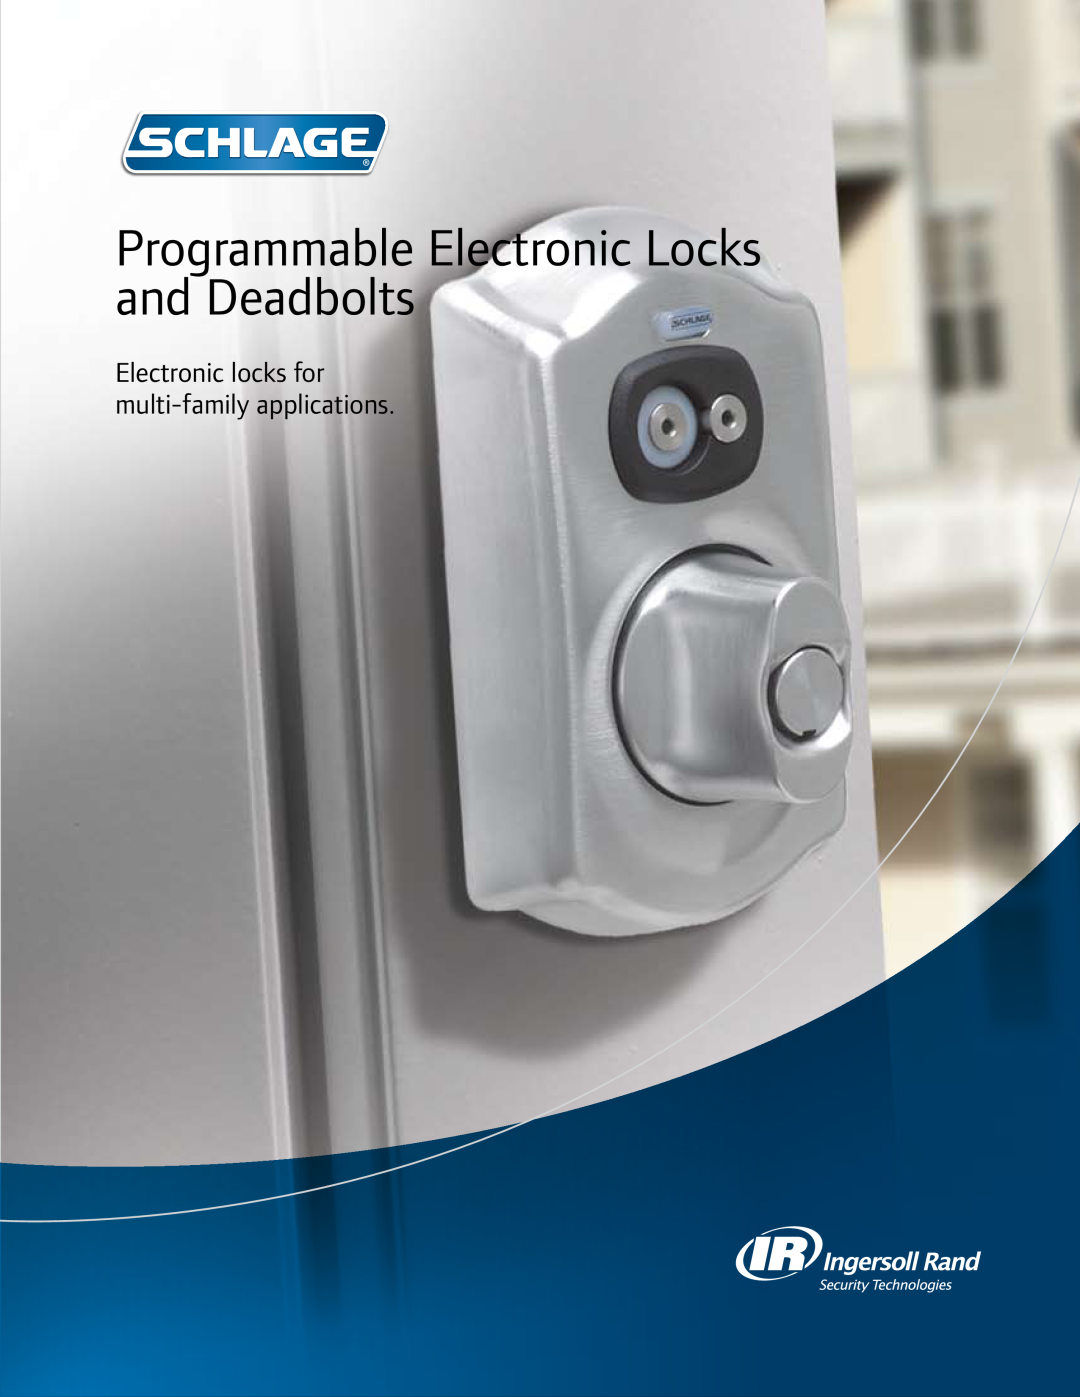 Ingersoll-Rand Schlage manual and Deadbolts, Programmable Electronic Locks, Electronic locks for, multi-familyapplications 